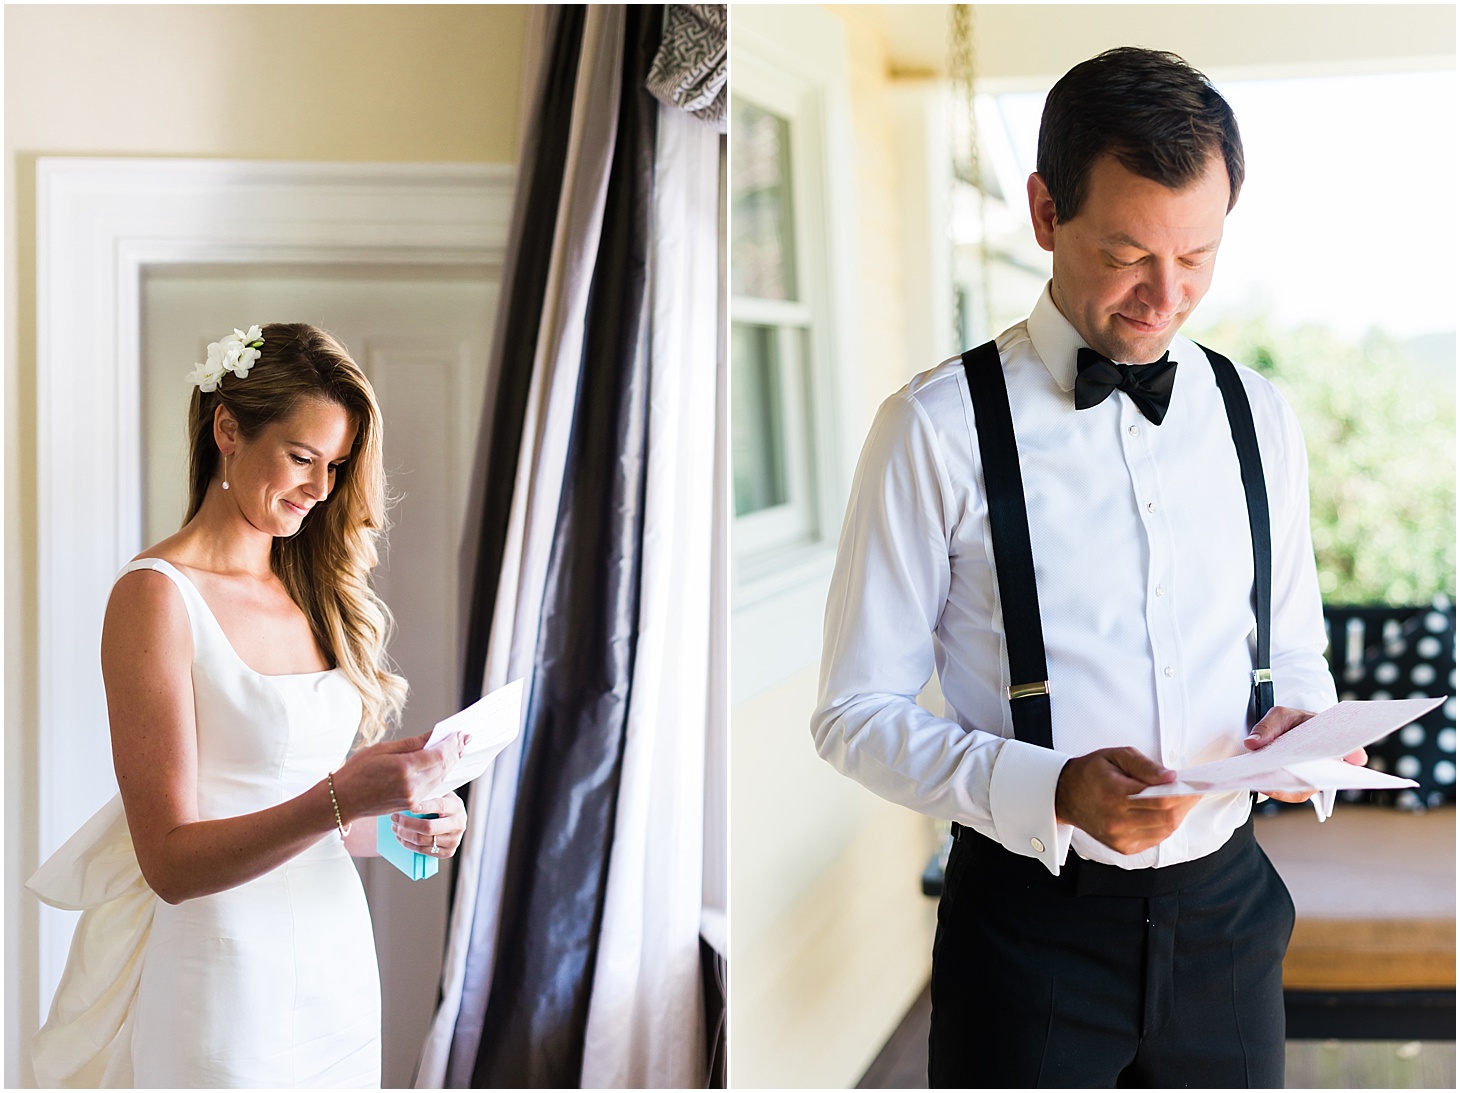 Bride and Groom Reading Letters at the Inn at Willow Grove, Green and White Summer Wedding at The Inn at Willow Grove, Ceremony at St. Isidore the Farmer Catholic Church, Sarah Bradshaw Photography, DC Wedding Photographer